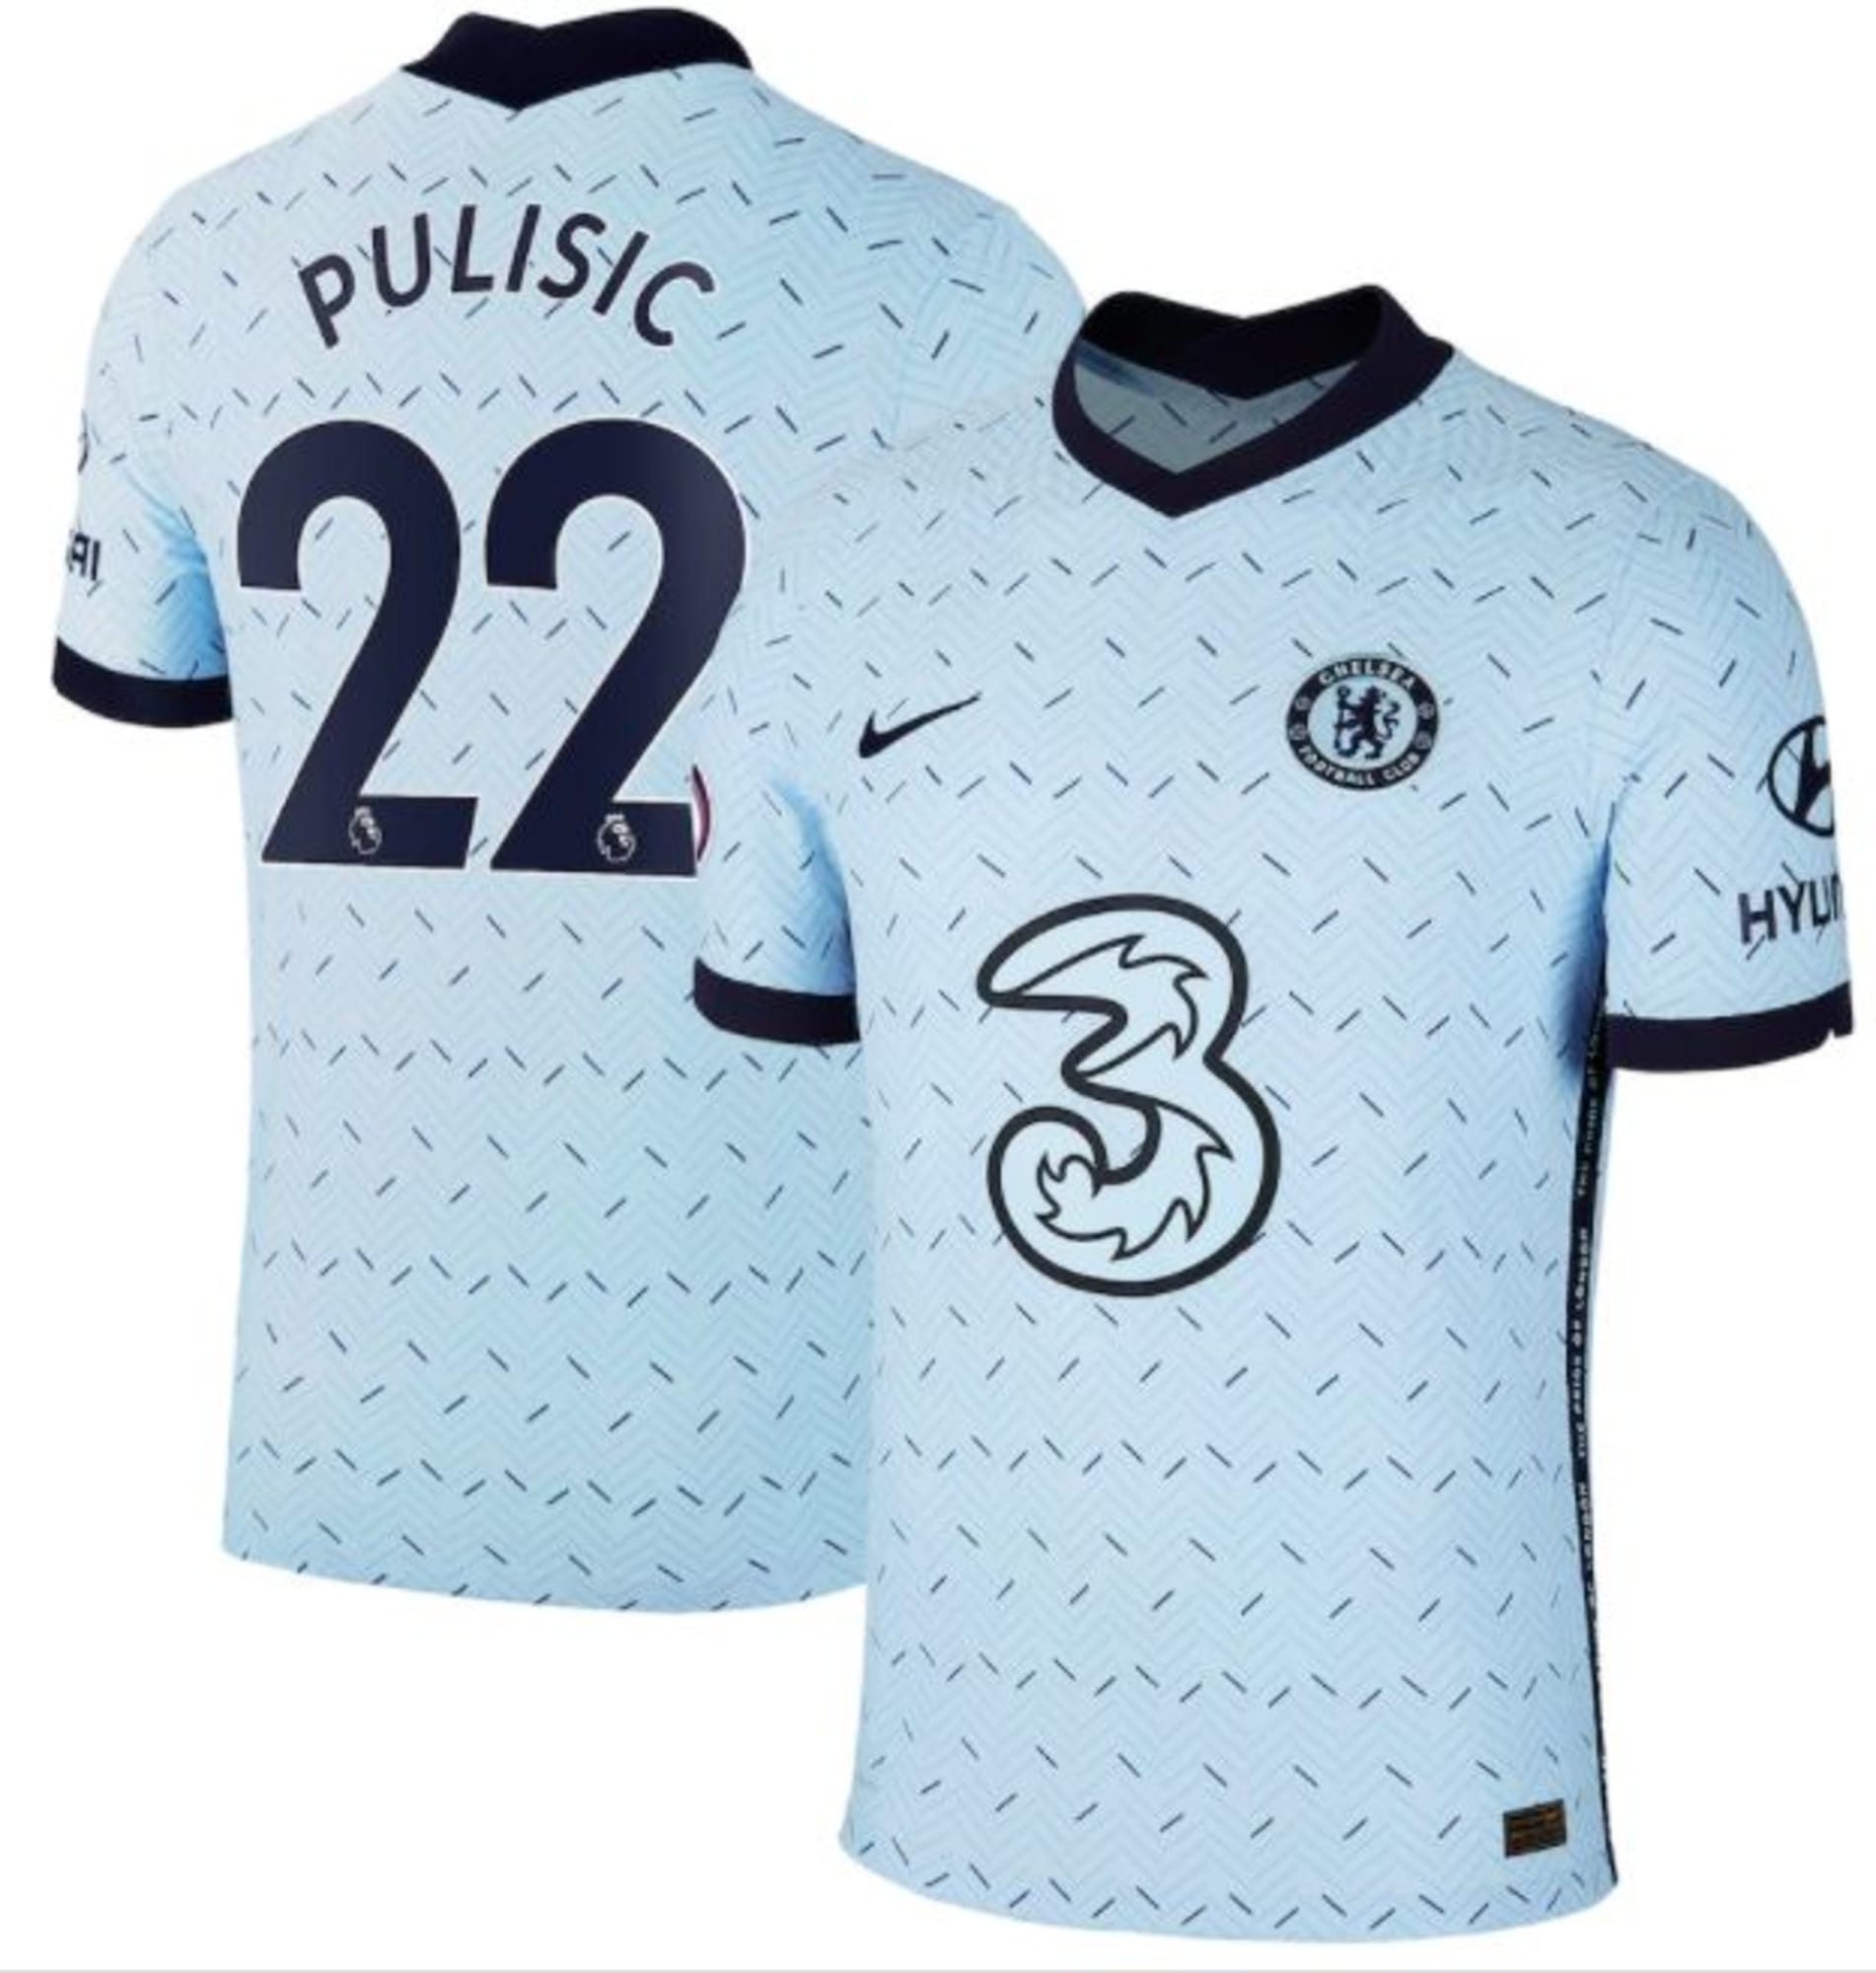 pulisic white chelsea jersey